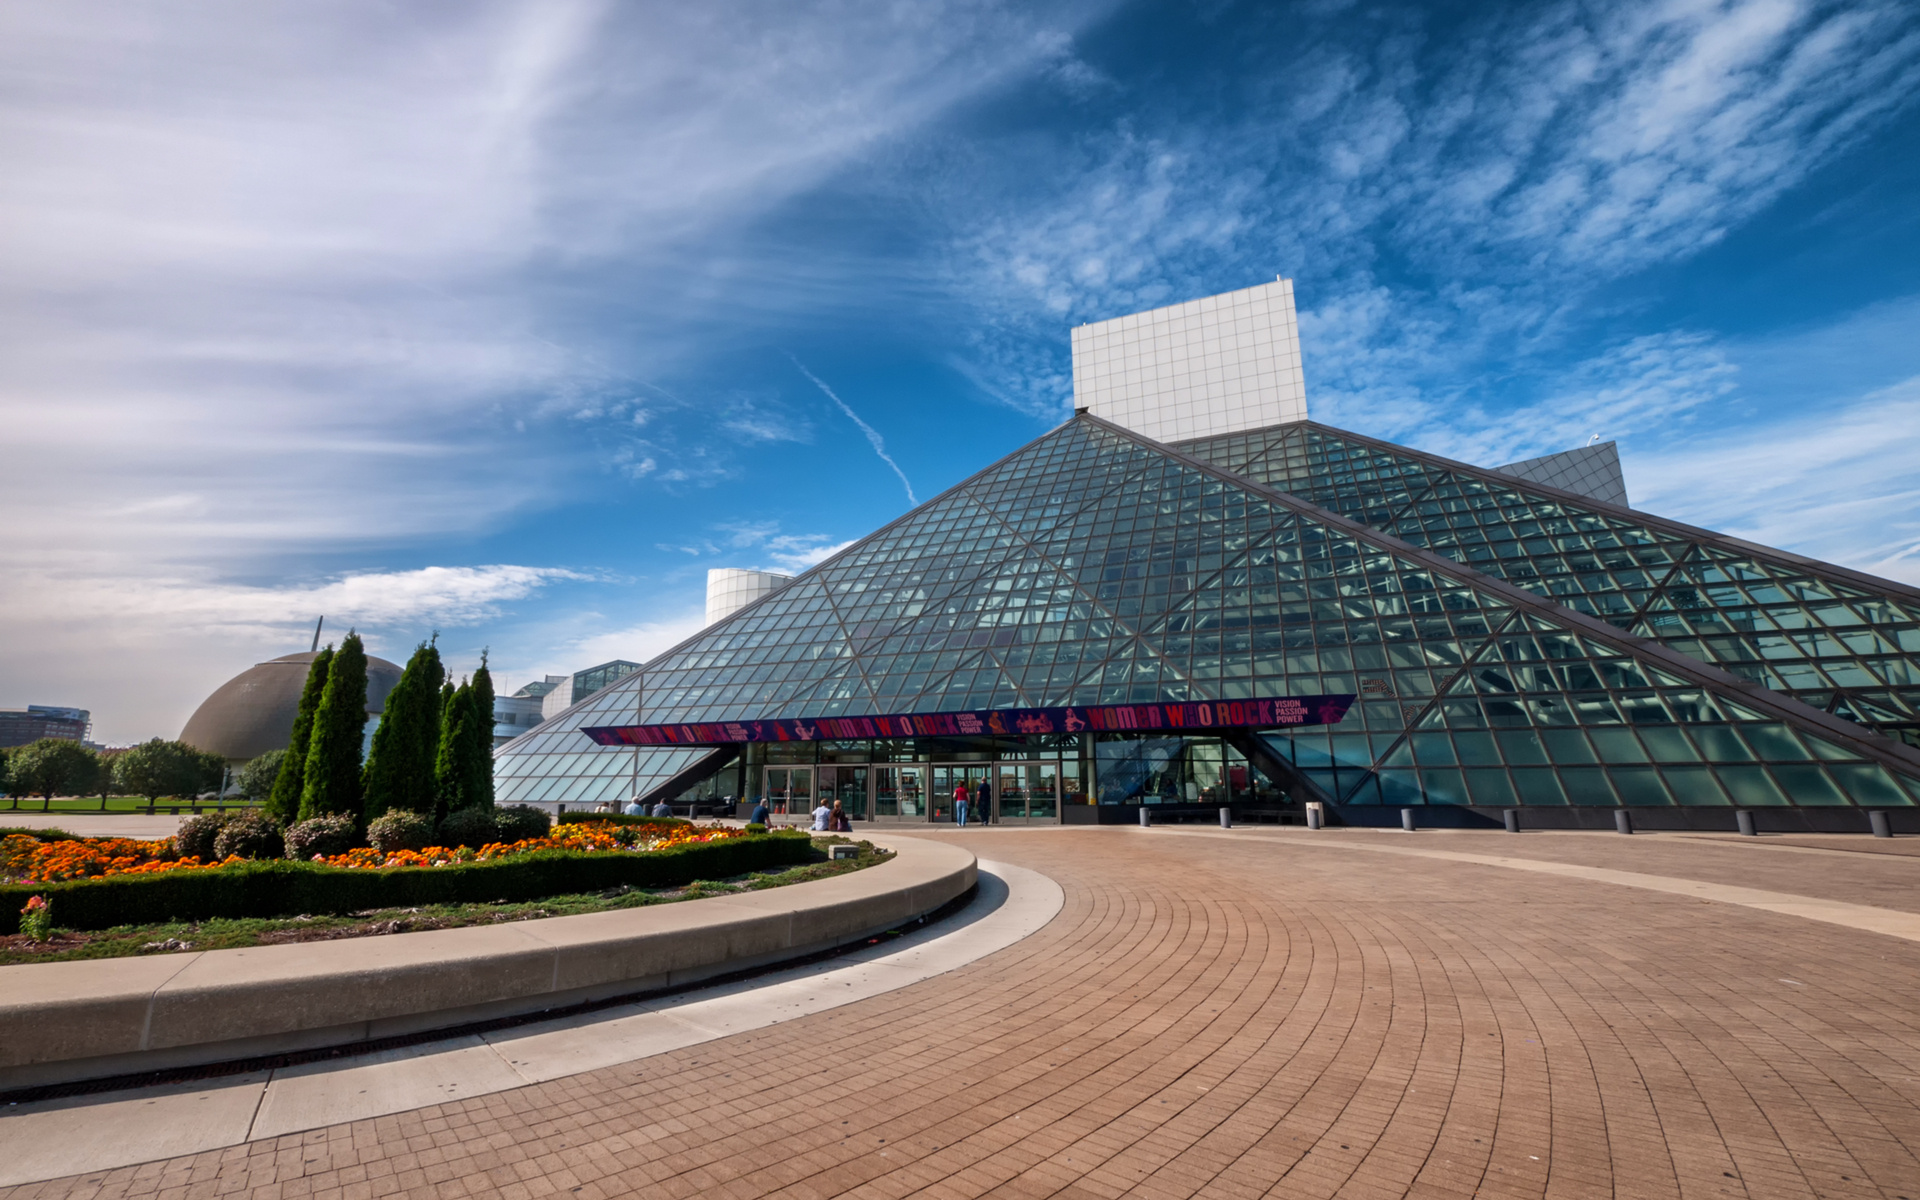 Rock and Roll Hall of Fame wallpapers, Popular attractions, Zoey Walker's collection, 1920x1200 HD Desktop